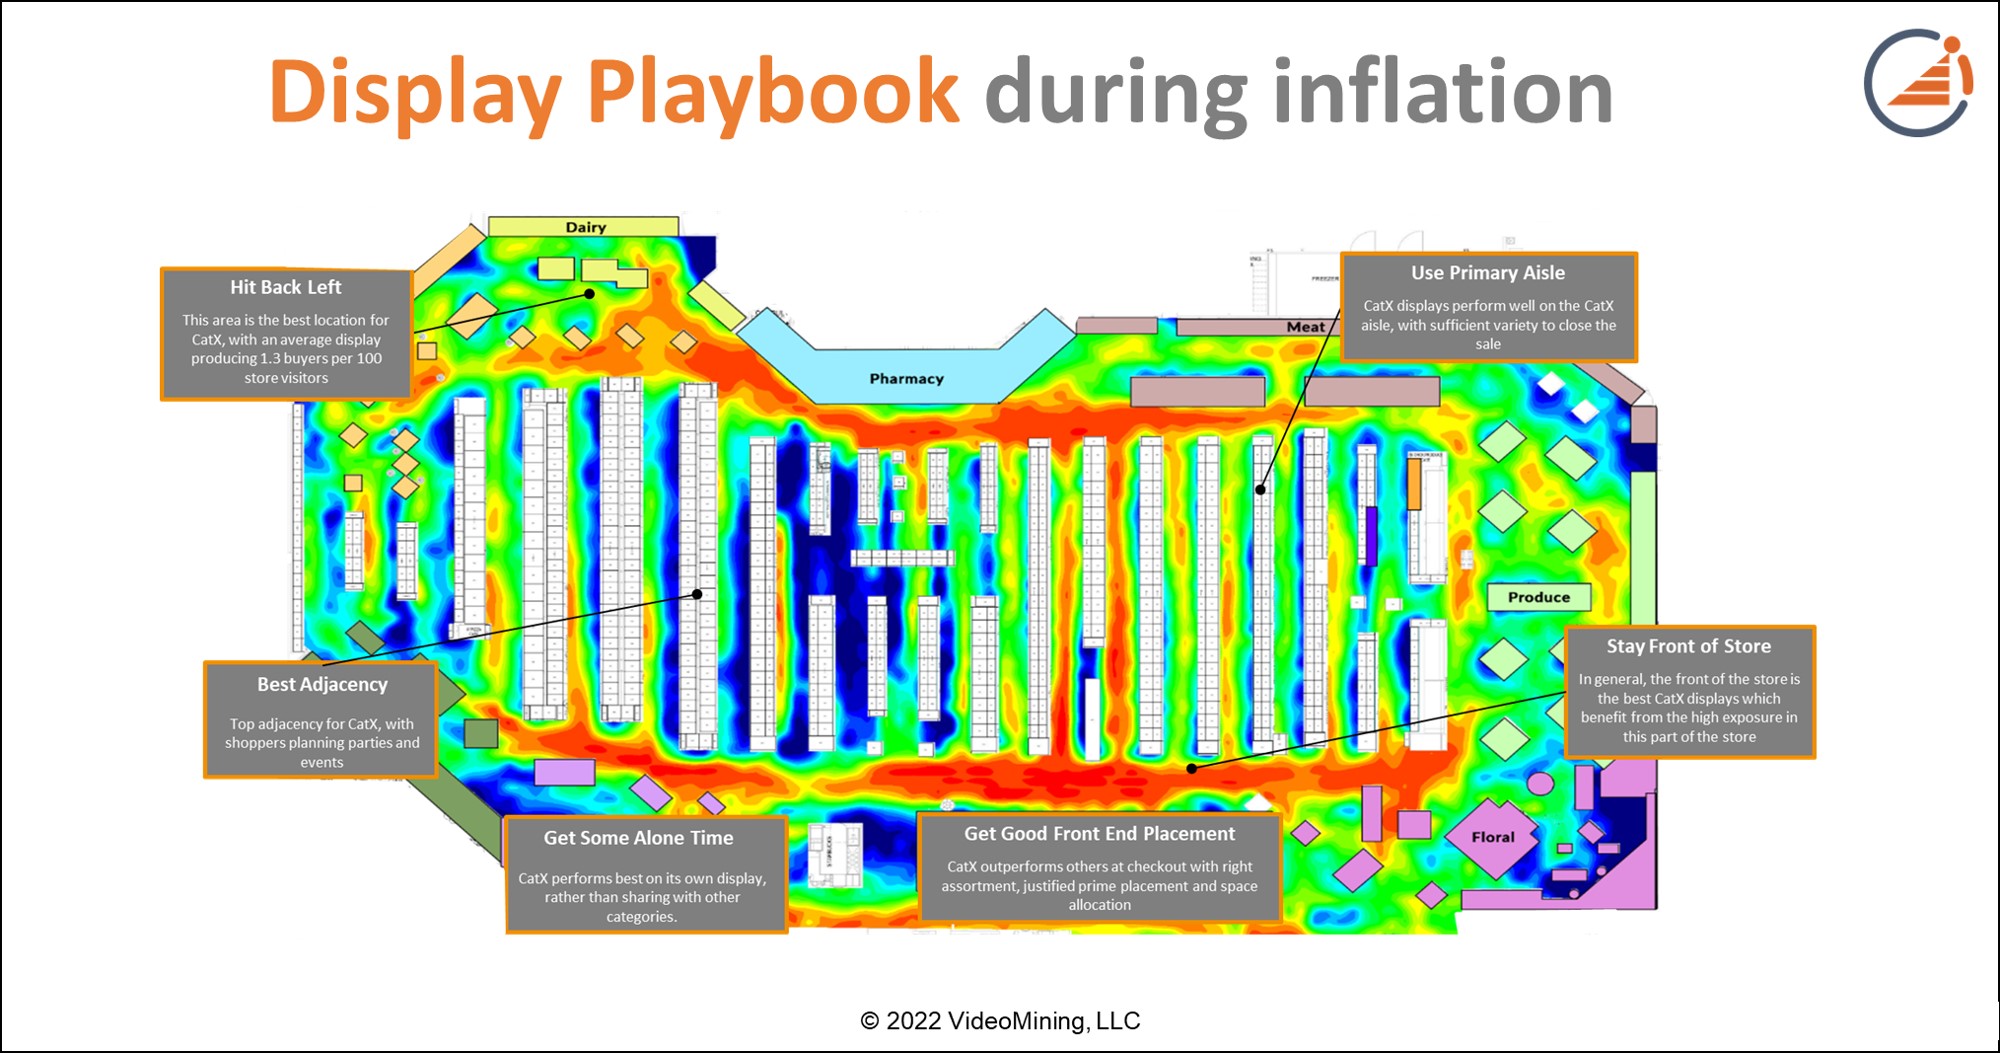 Display Playbook during inflation